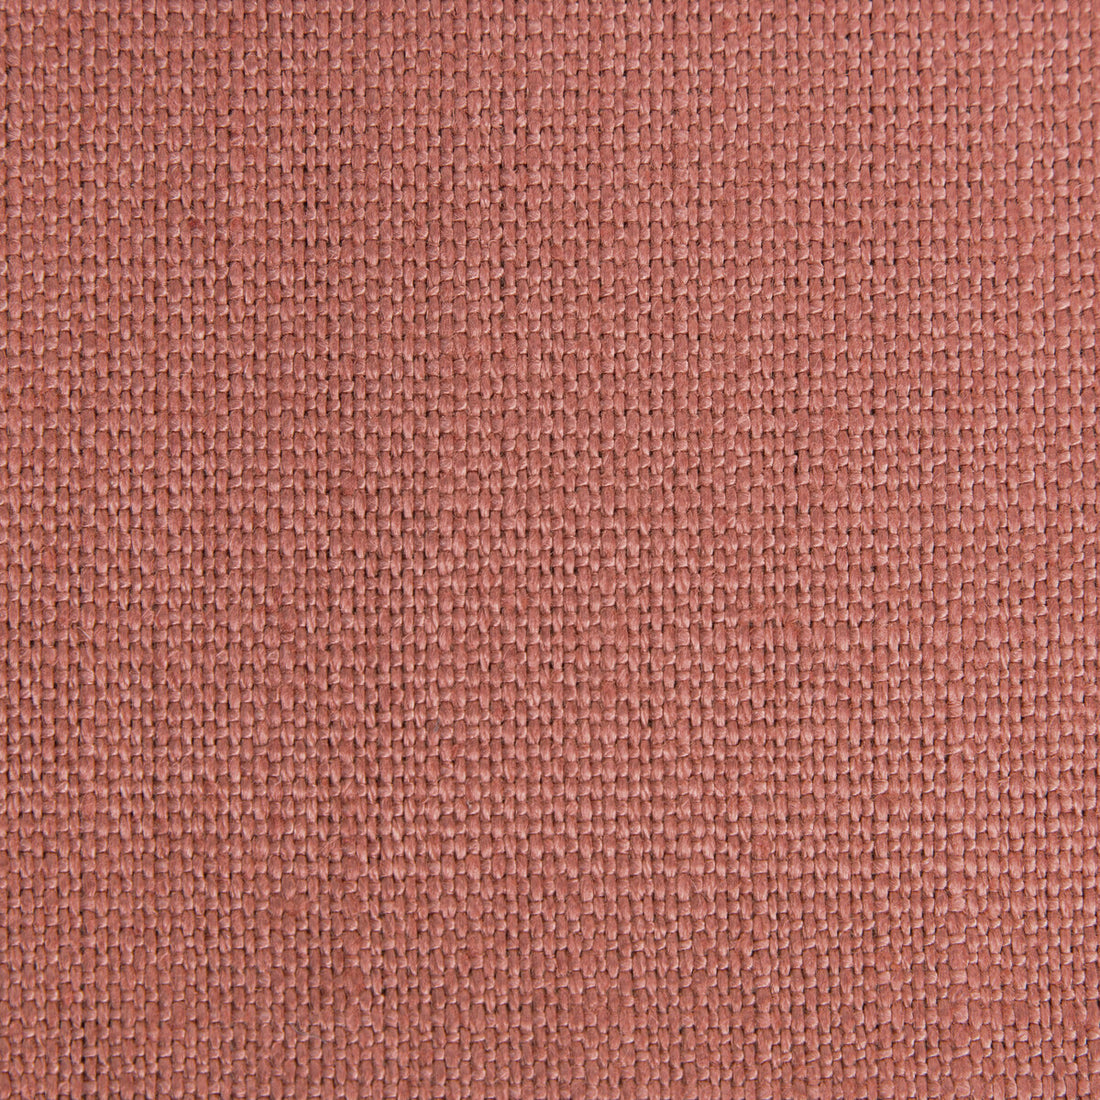 Stone Harbor fabric in coral color - pattern 27591.1112.0 - by Kravet Basics